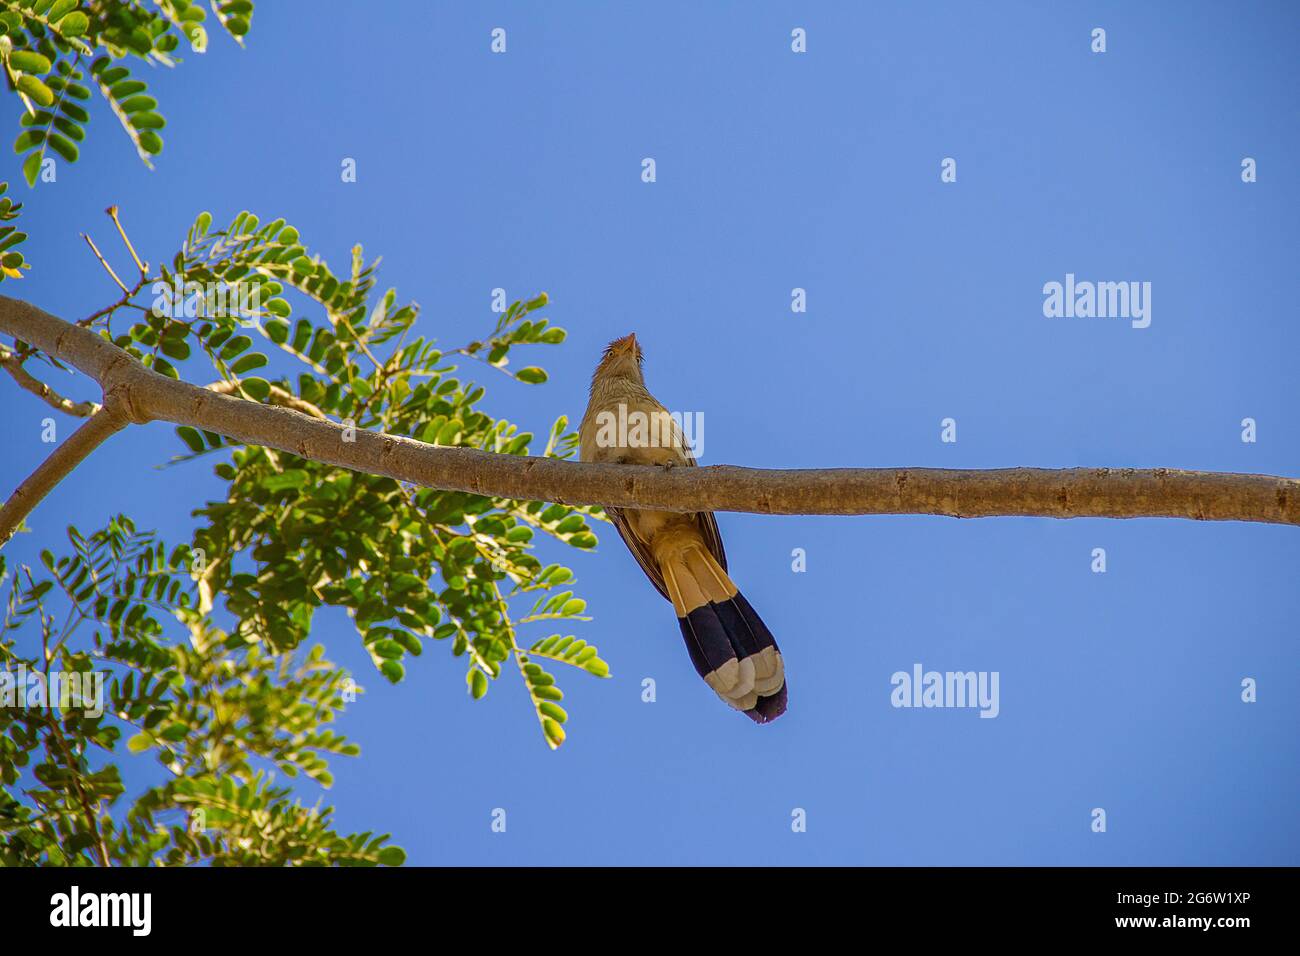 A Guira Cuckoo (Guira guira) on a tree branch with blue sky in the background. (Anu-Branco) Stock Photo